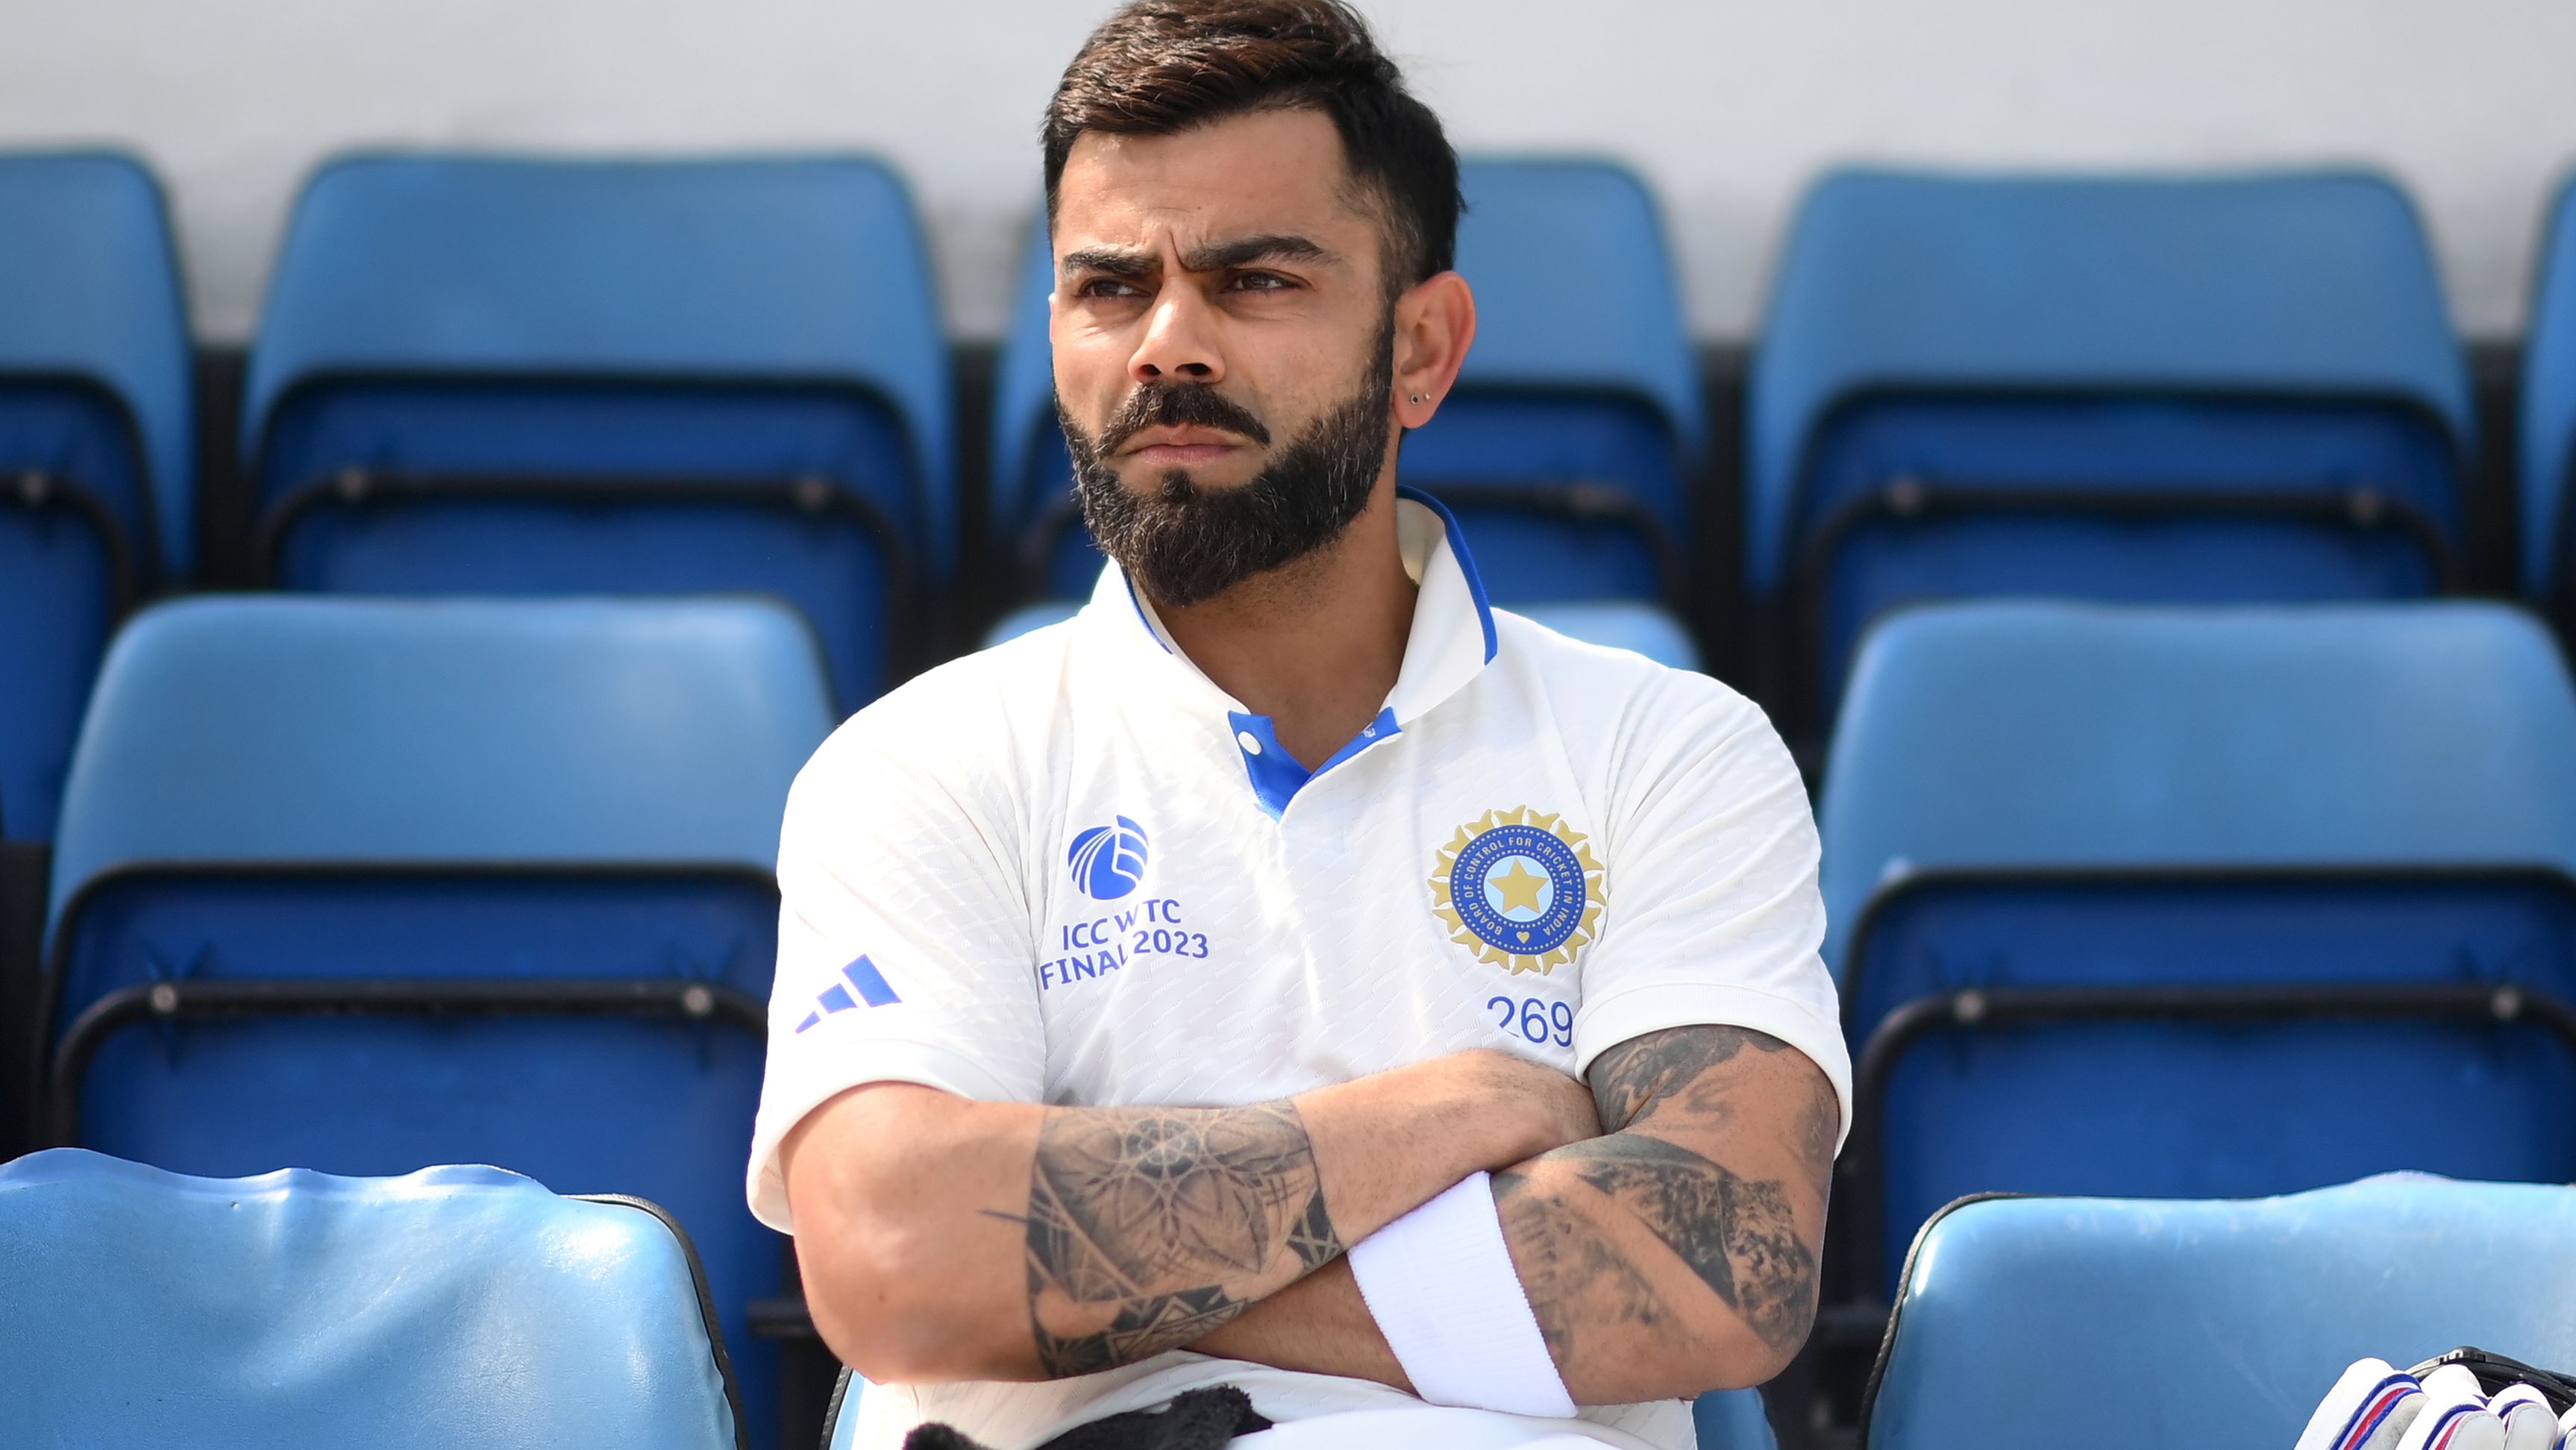 Virat Kohli of India waits before batting during day five of the ICC World Test Championship Final between Australia and India at The Oval on June 11, 2023 in London, England. (Photo by Alex Davidson-ICC/ICC via Getty Images)